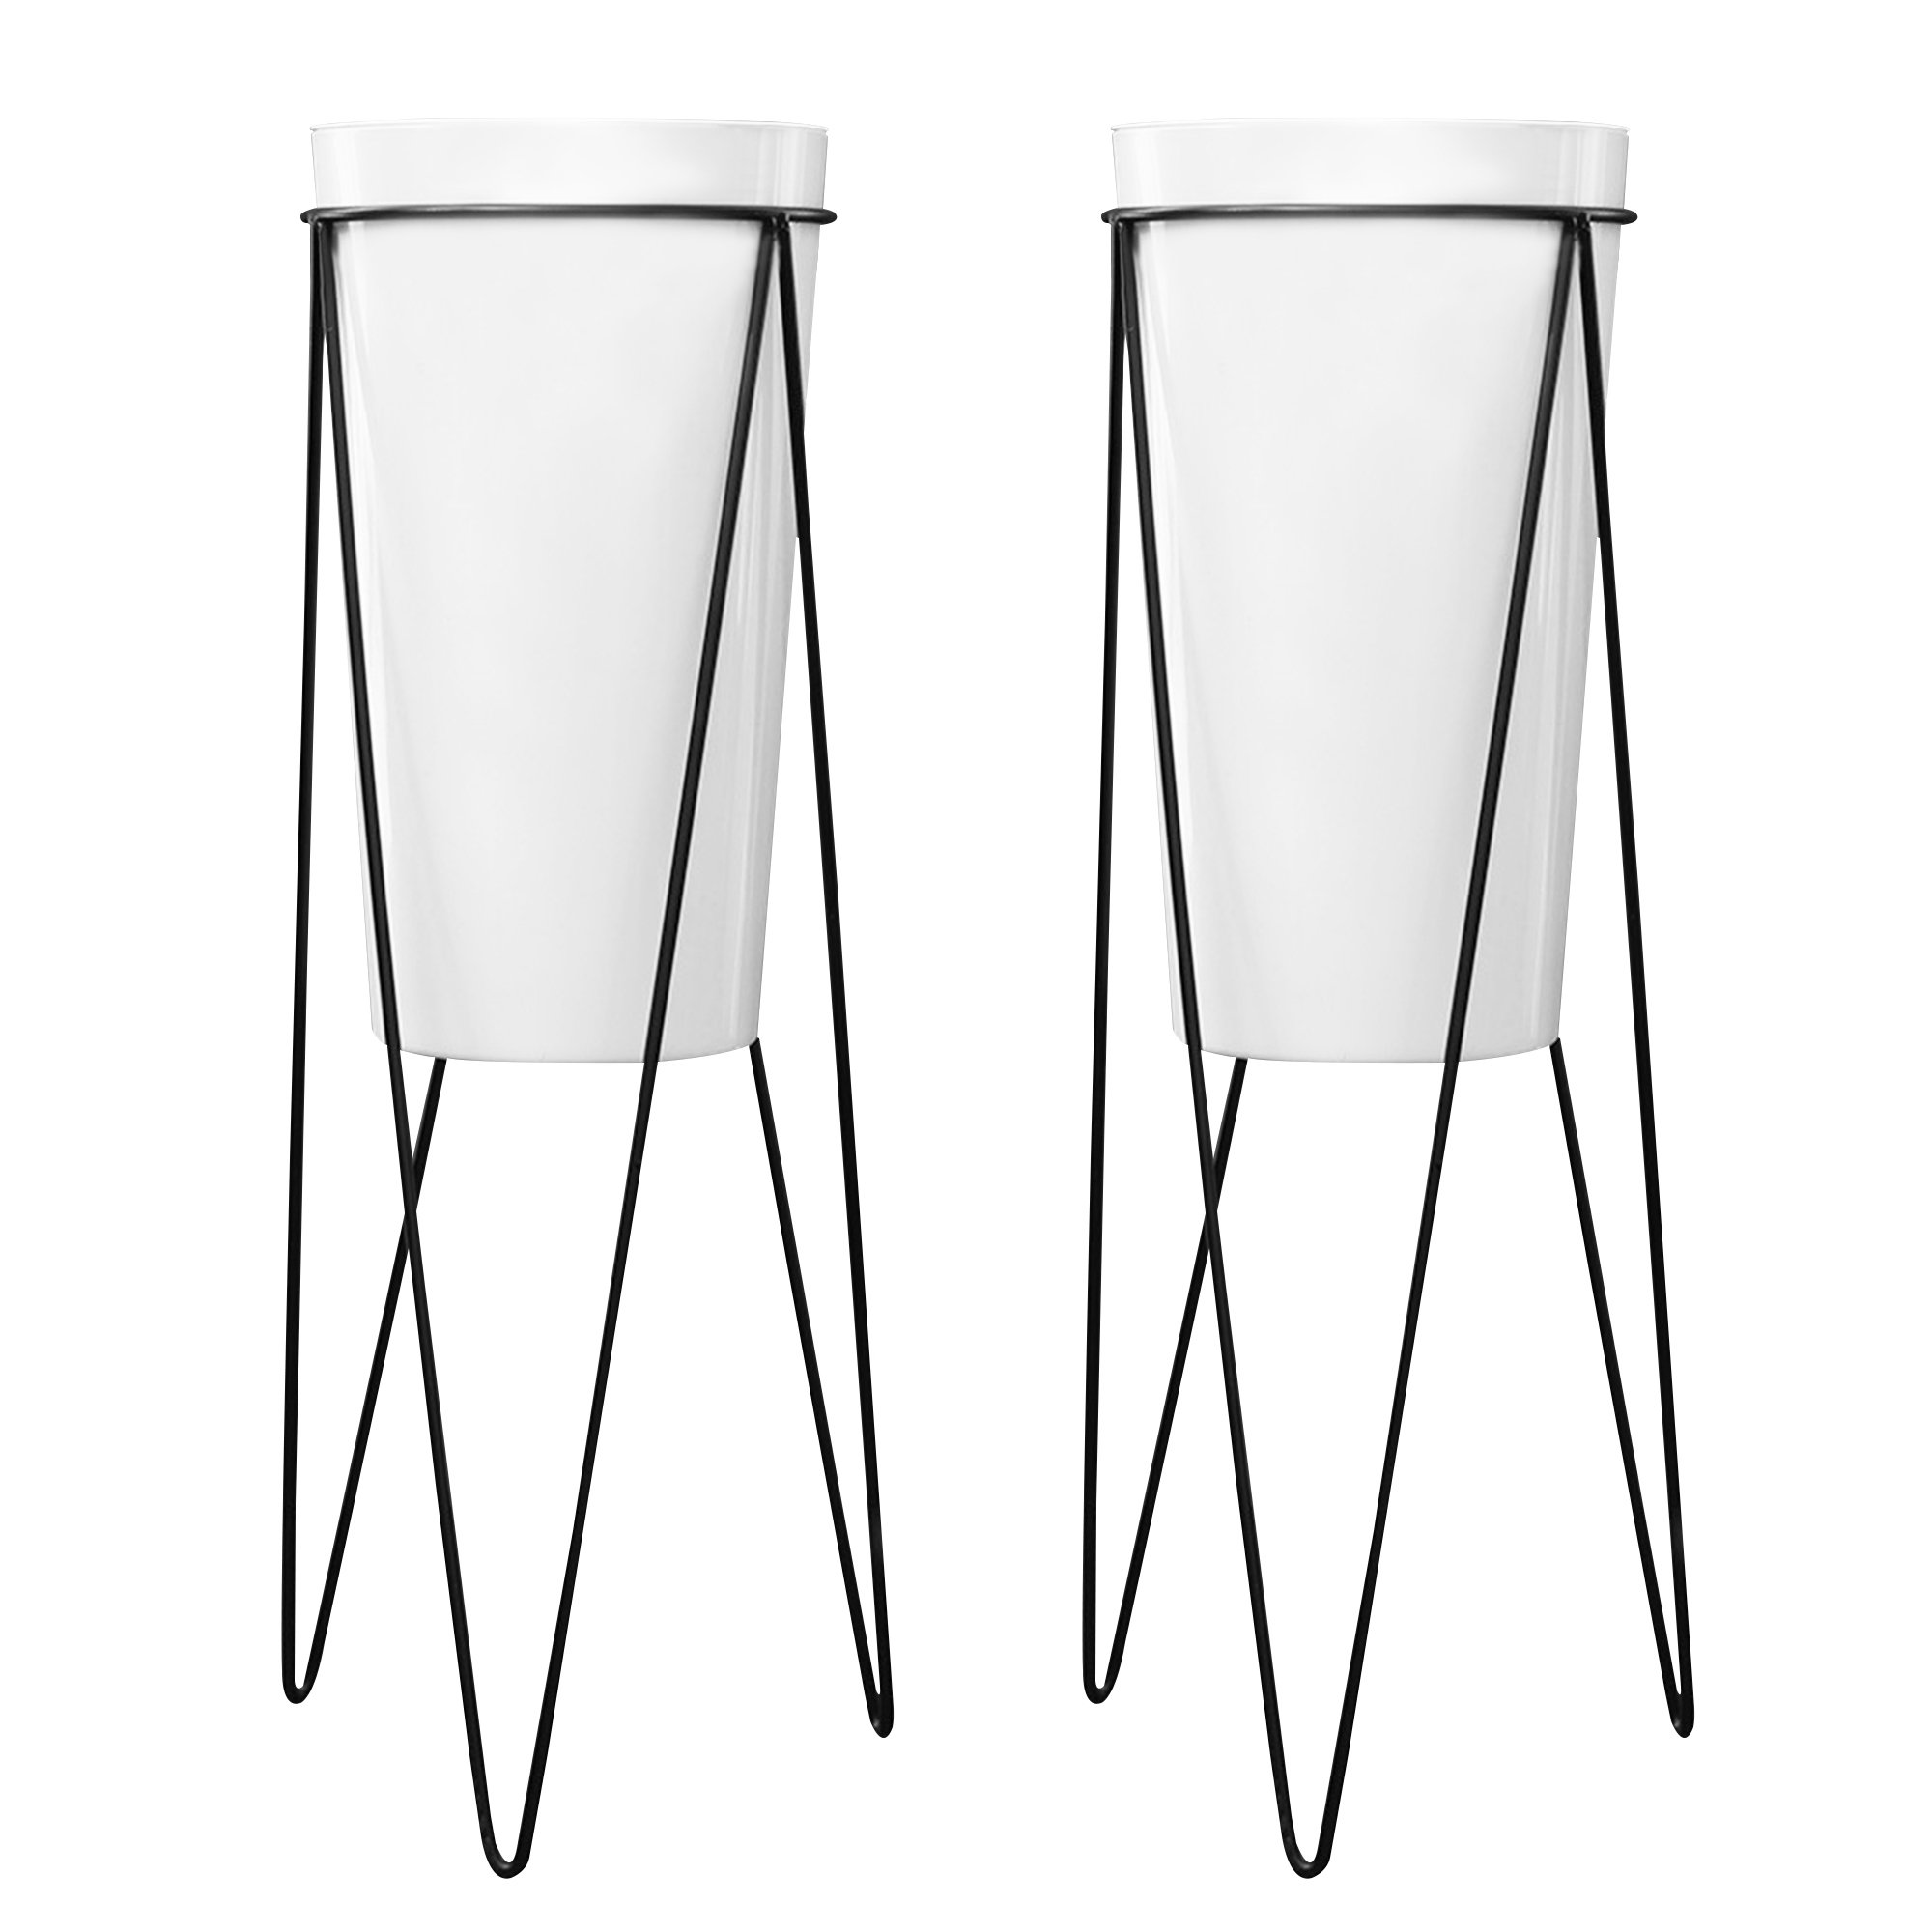 Flower Pot Planter with Metal Stand - Set of 2